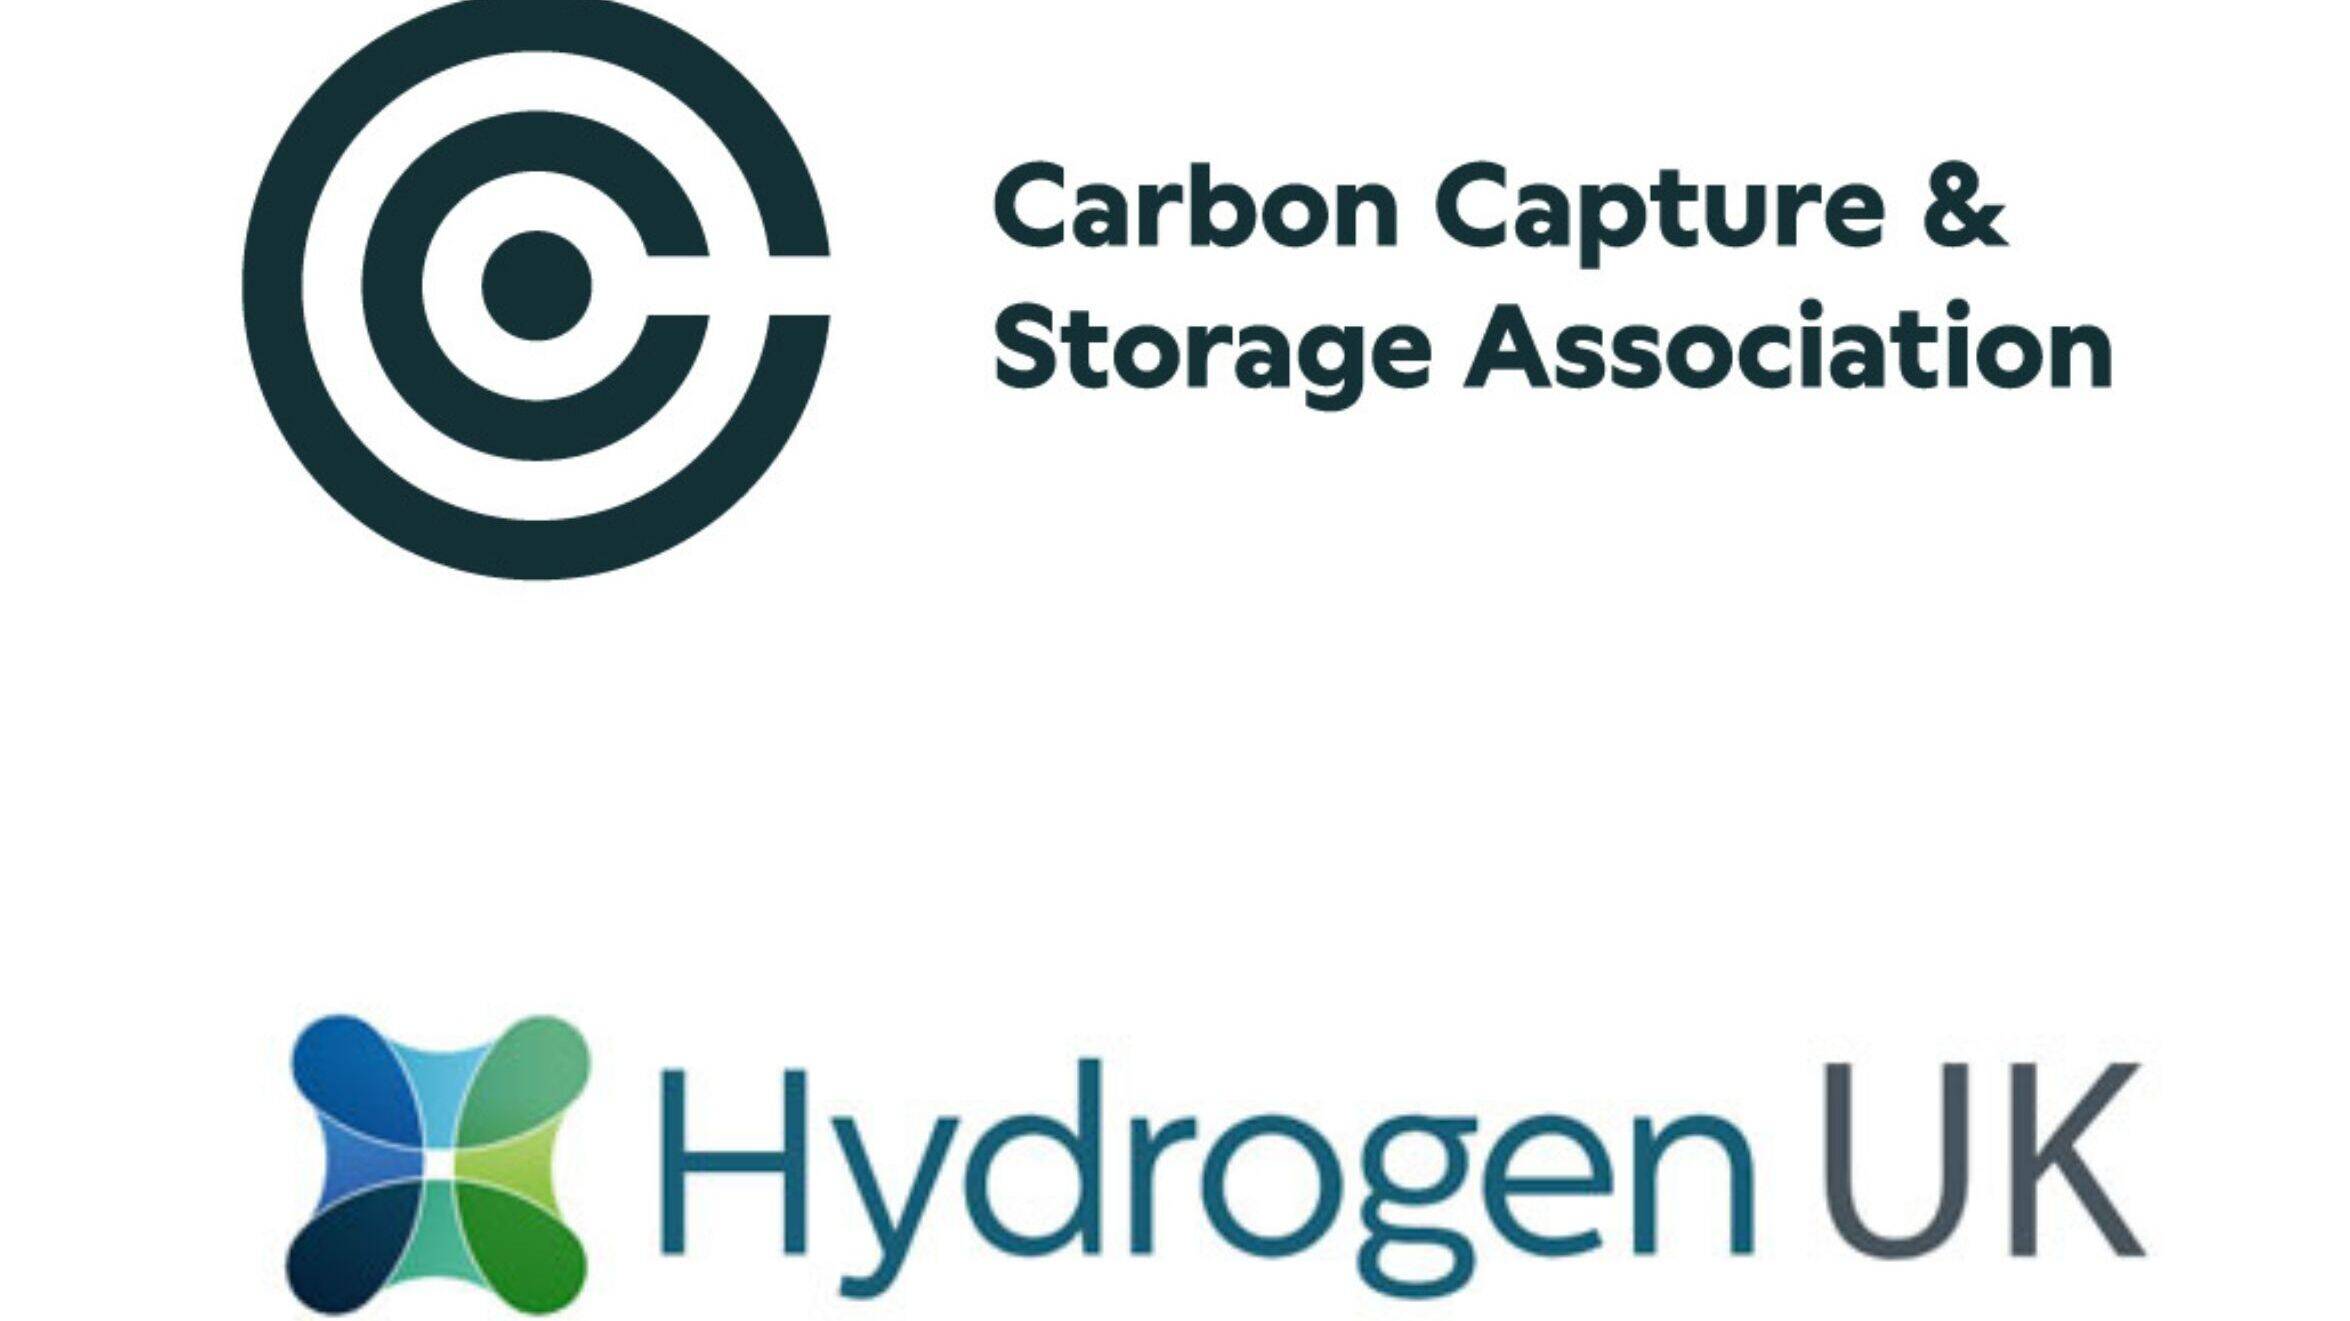 Raising our profile in CCS and hydrogen in the UK